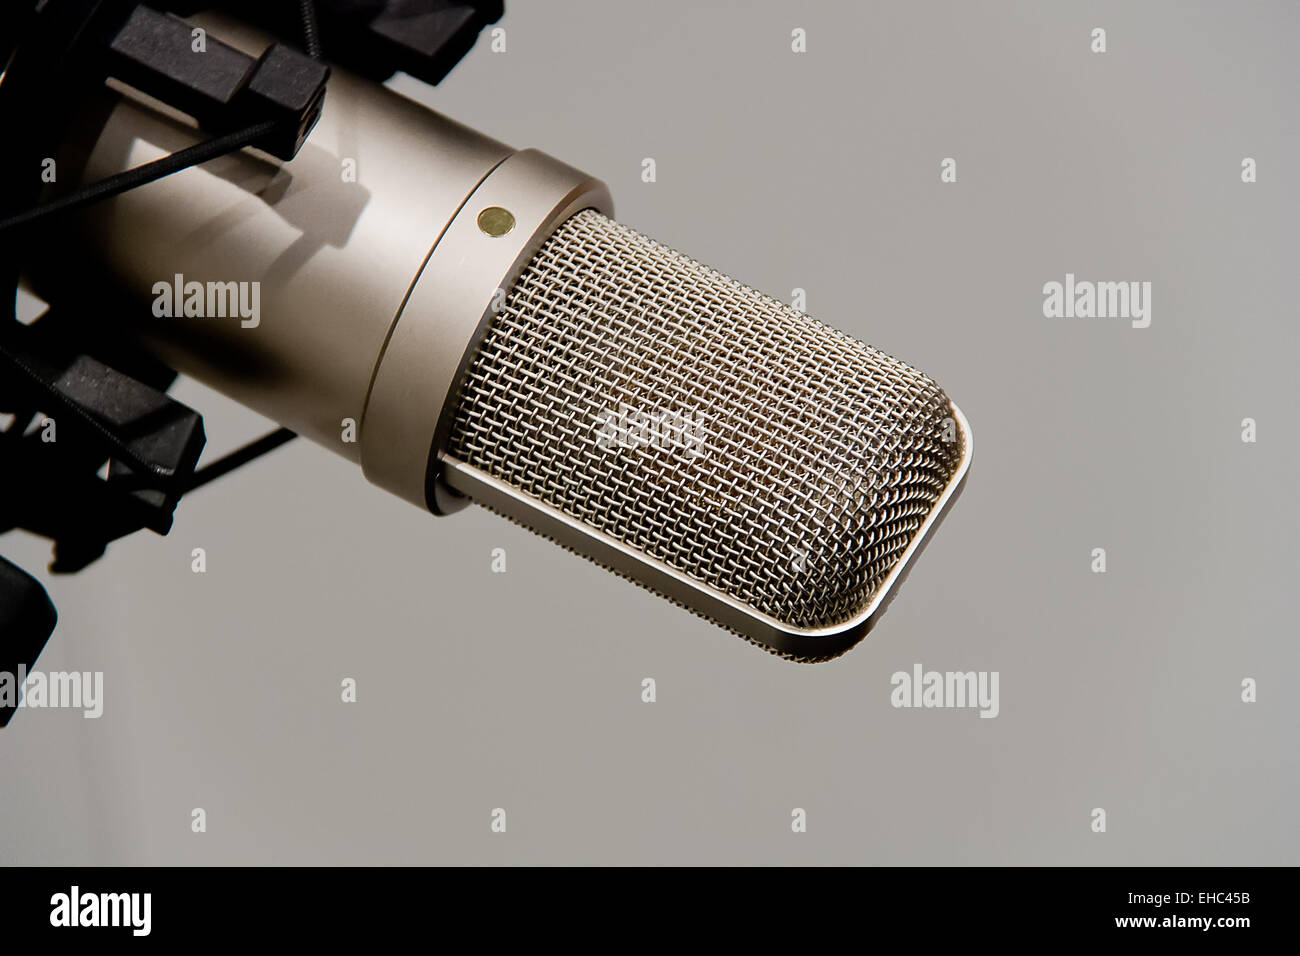 Professional condenser microphone in a studio environment Stock Photo